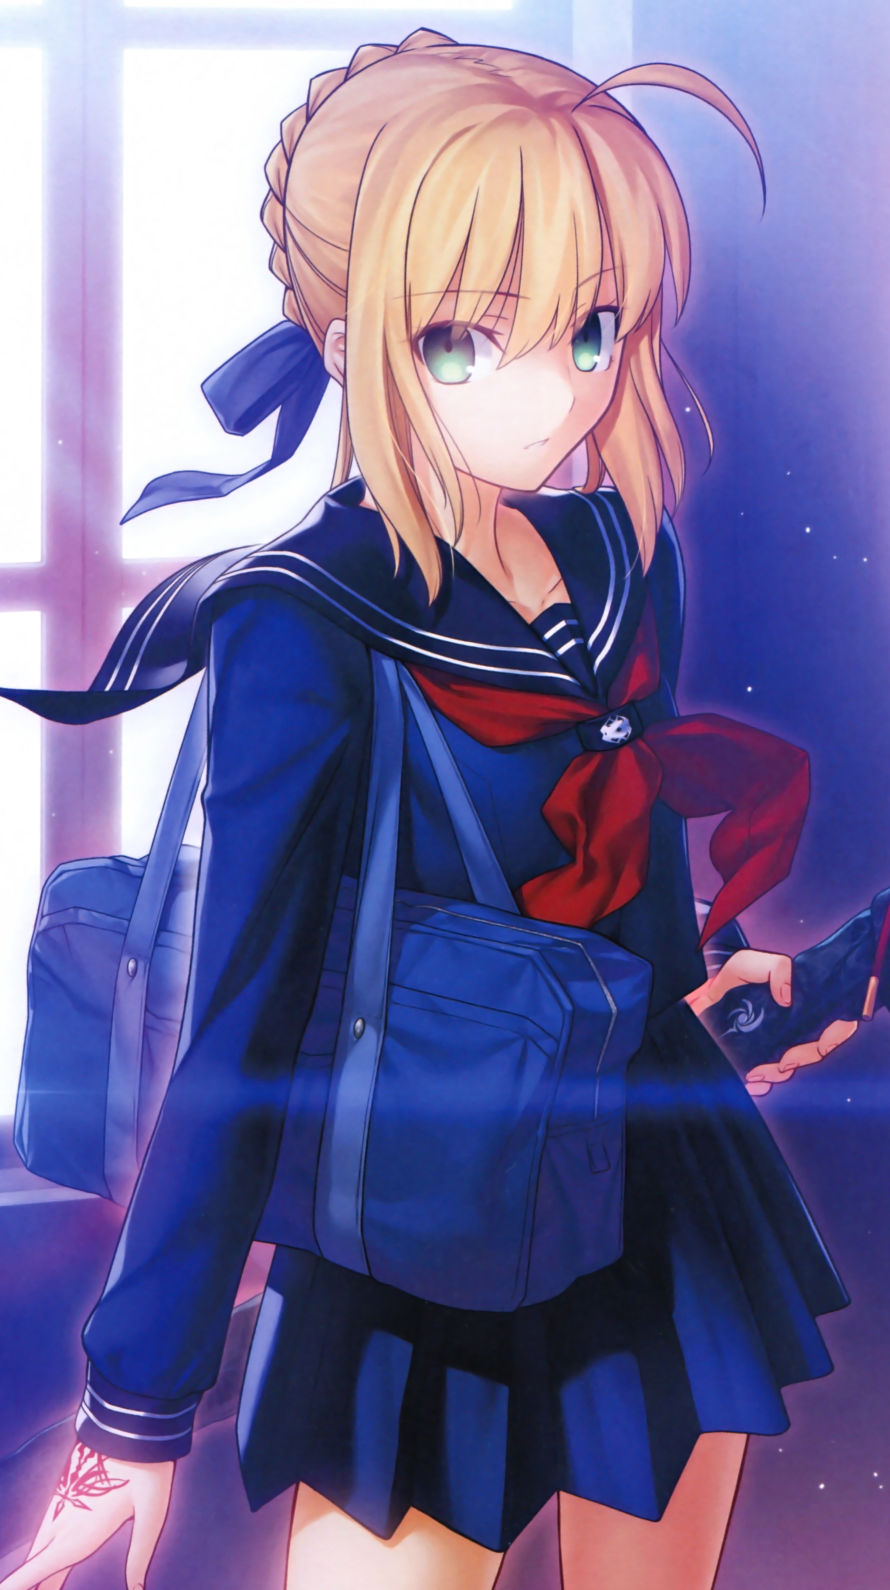 Fate Iphone壁紙画像 Androidスマホ壁紙 2 セイバー Iphone6 Iphone5s アニメ壁紙ネット Pc Android Iphone壁紙 画像